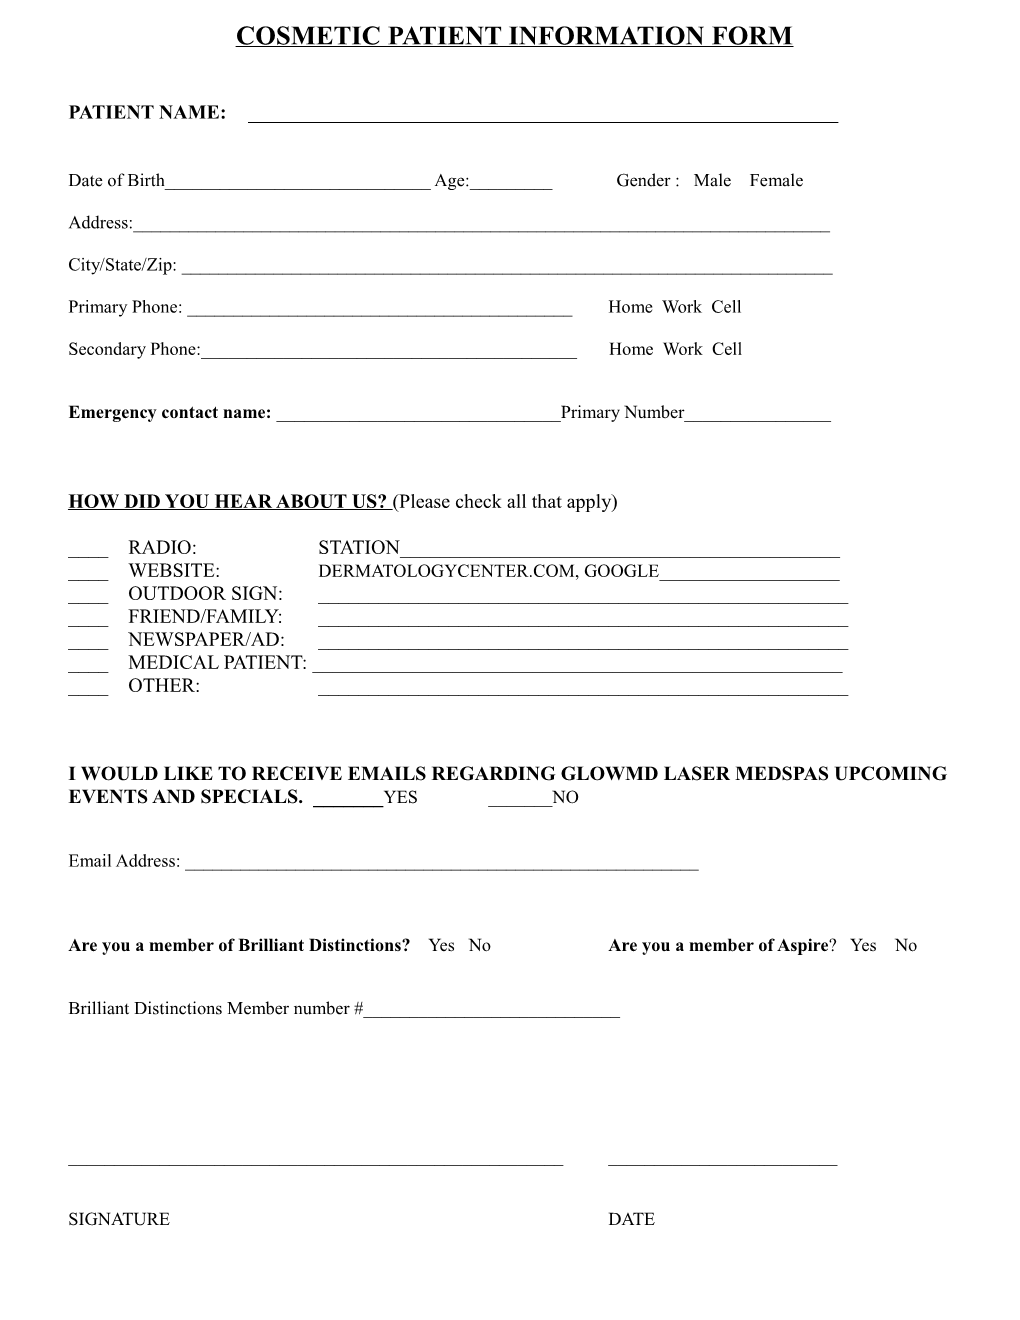 Cosmetic Patient Information Form